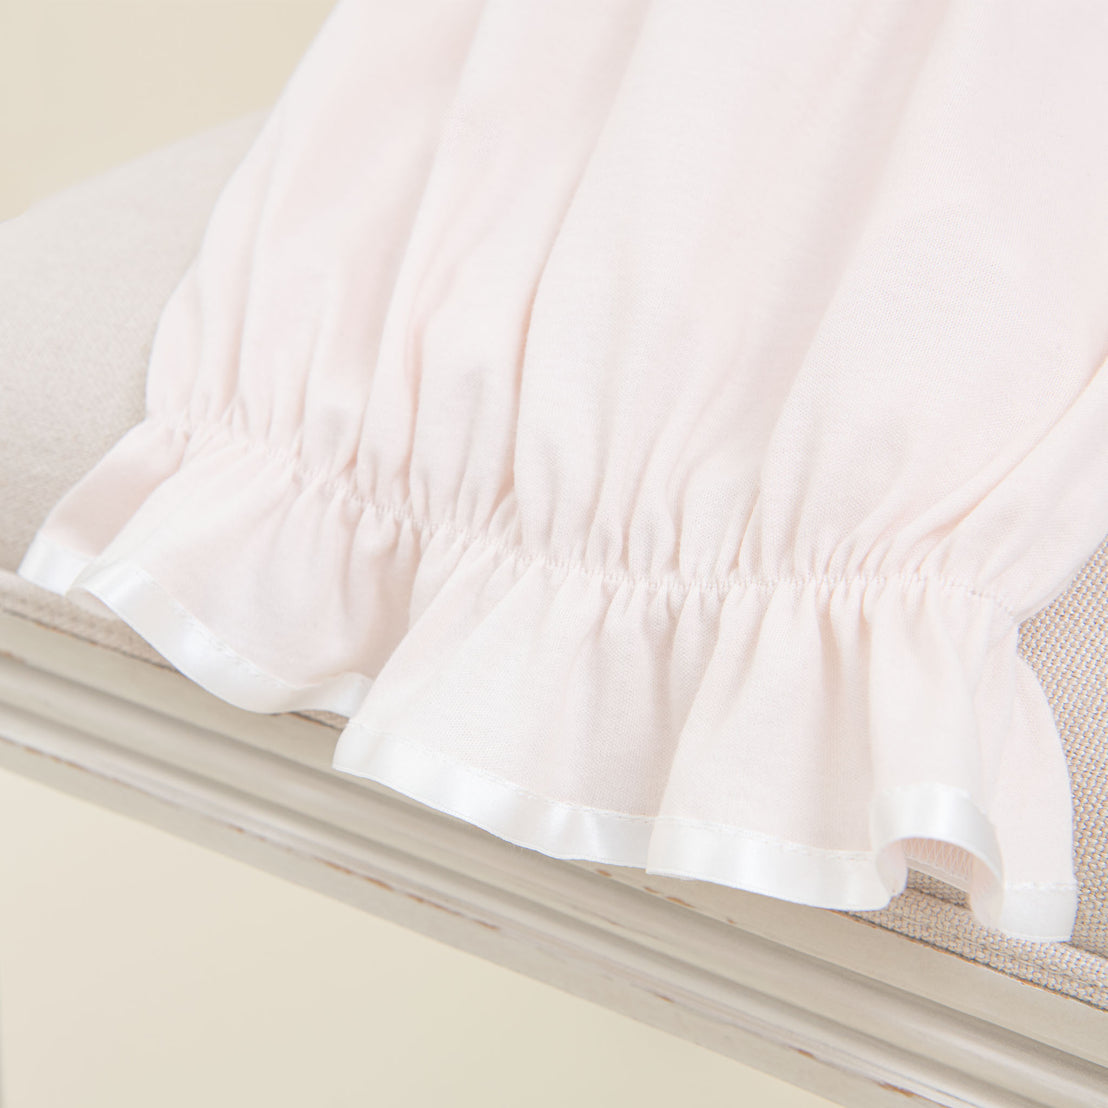 Close-up of a Rose Layette & Bonnet with a traditional light pink, ruffled edge lying on a beige surface, highlighting the delicate fabric texture and soft color tone.